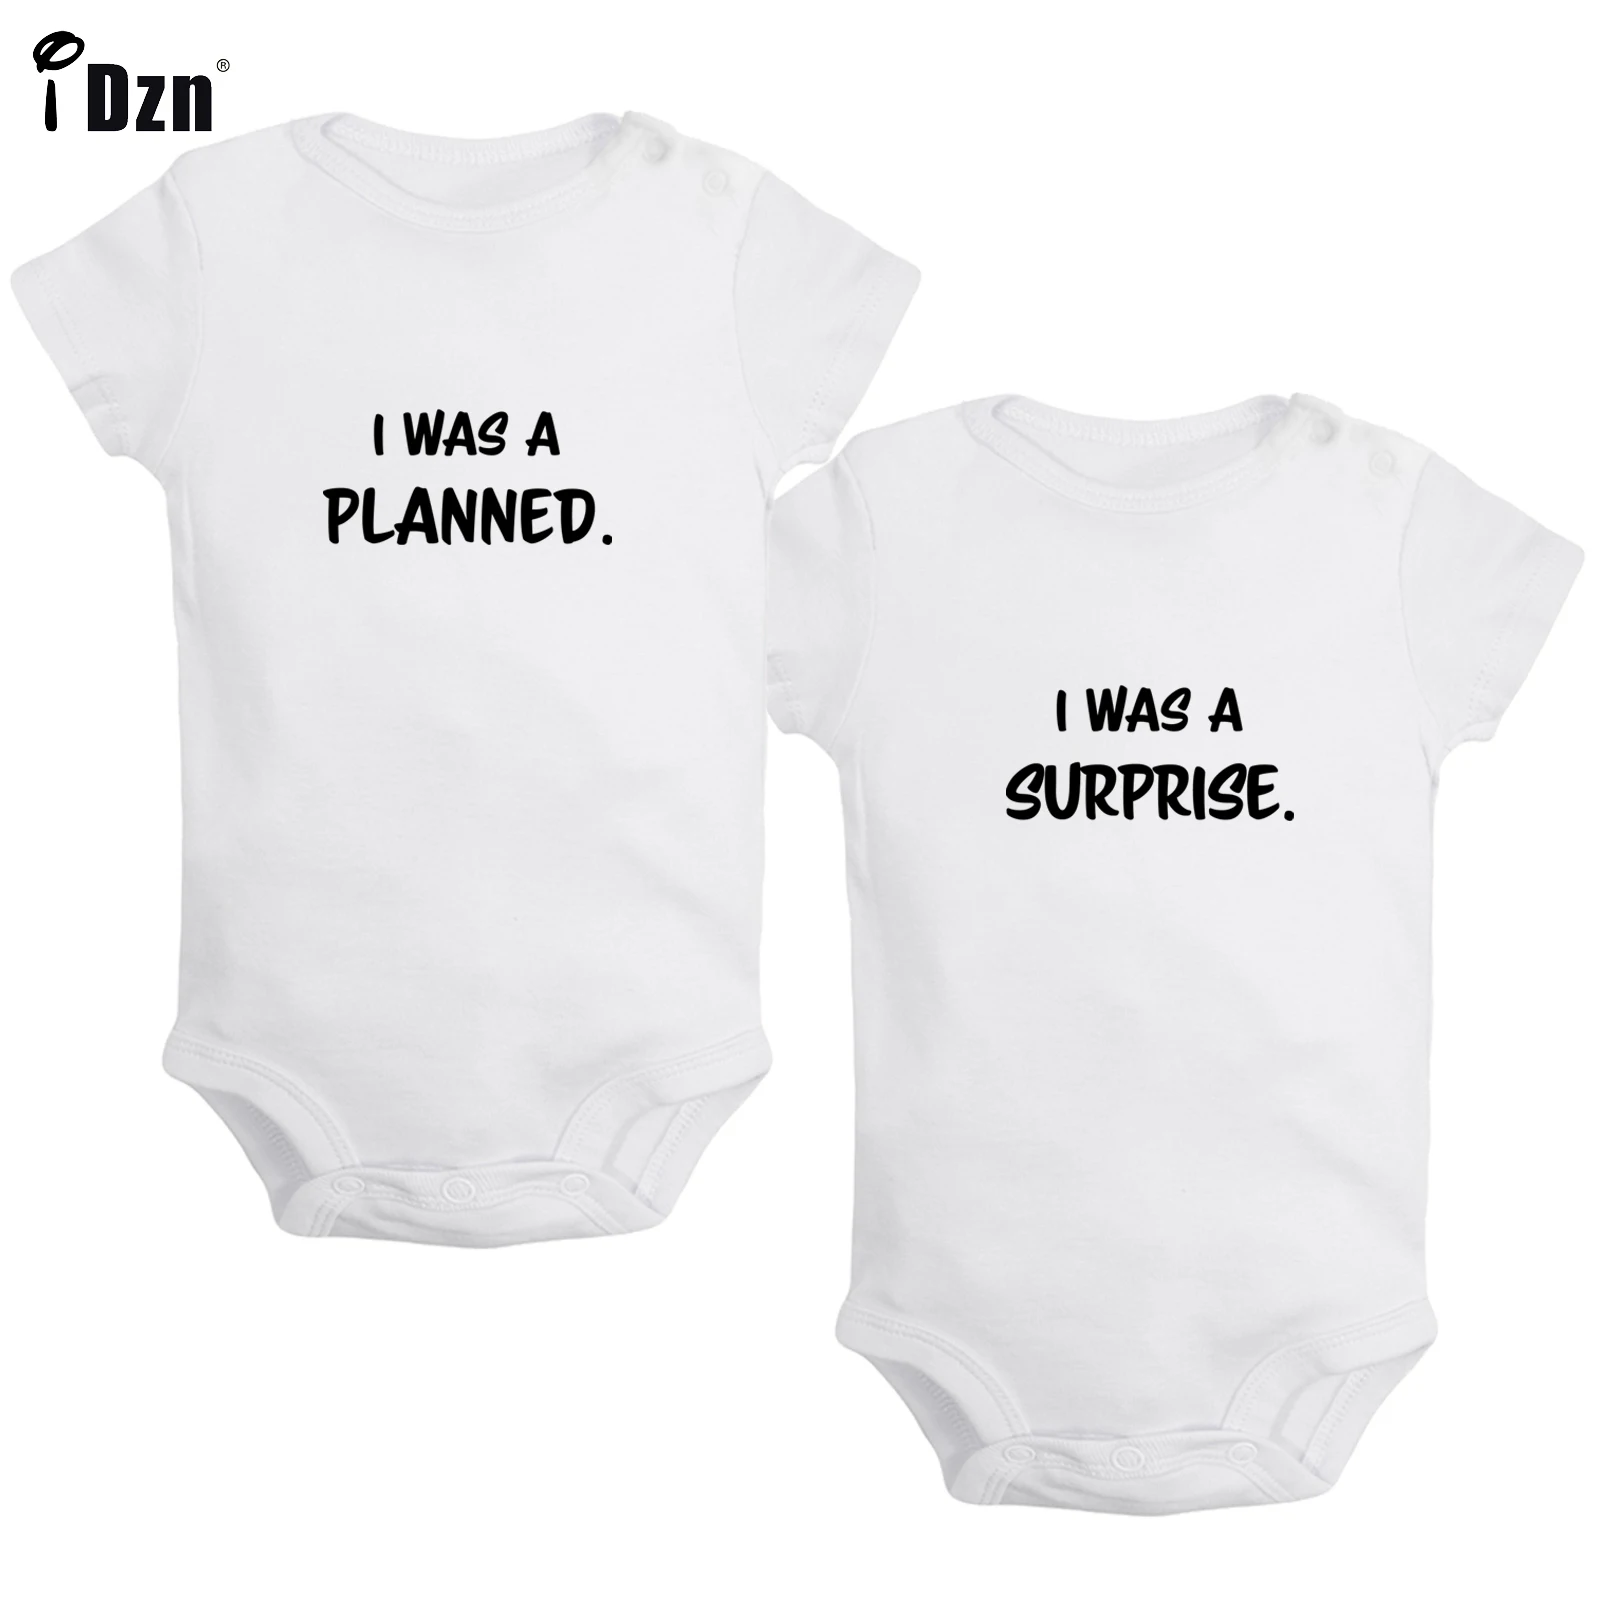 

Baby Twins Summer Clothing Funny I Was A Planned I Was A Surprise Baby Bodysuits Cotton Rompers Soft Newborn Jumpsuit Pack of 2